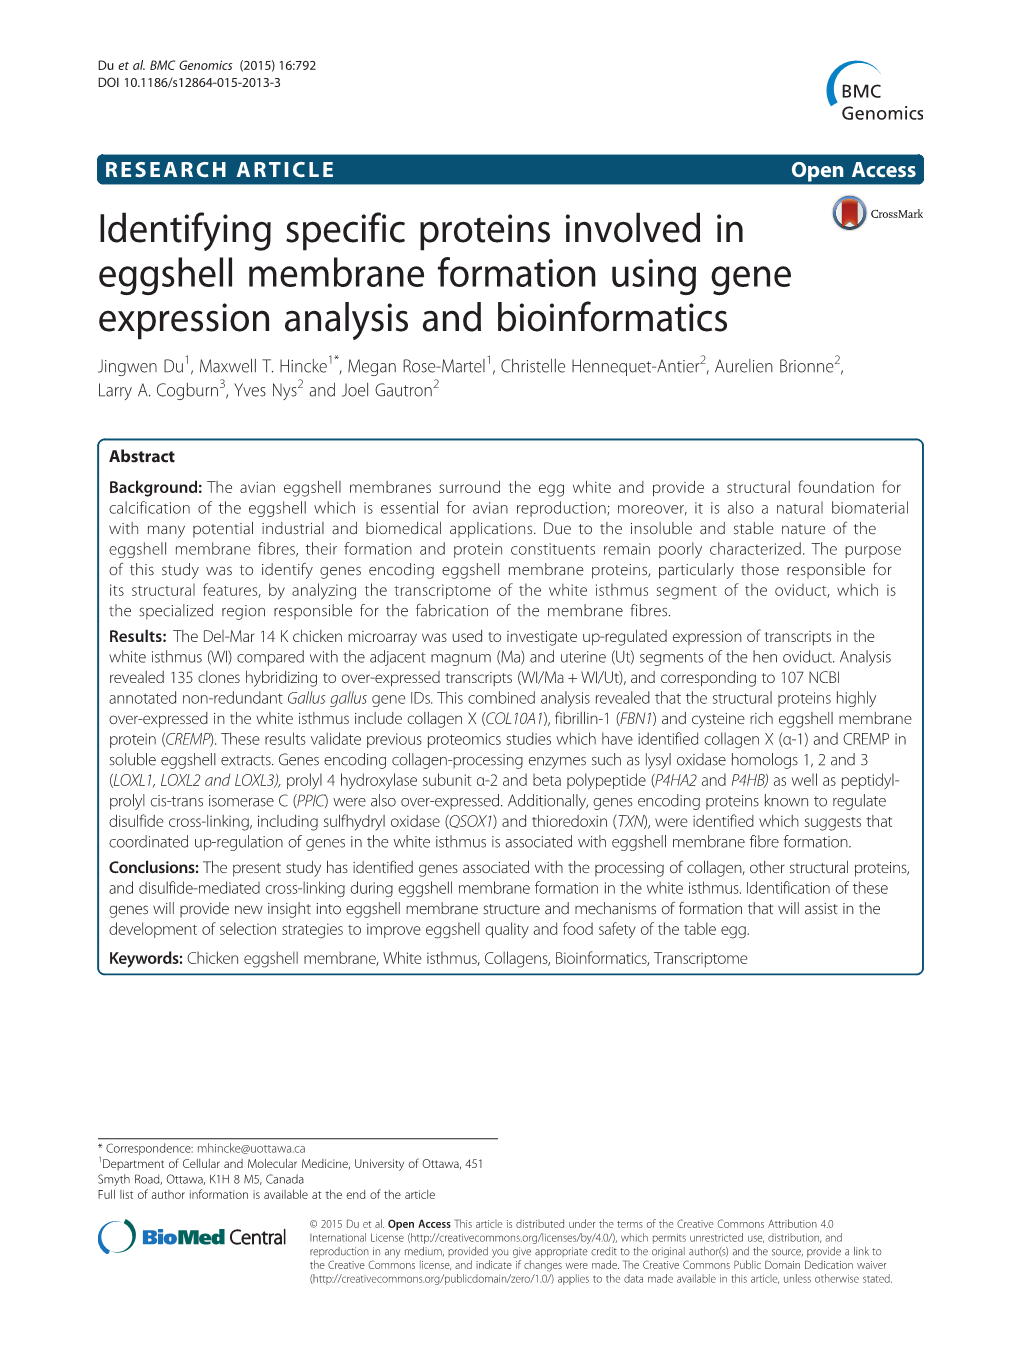 Identifying Specific Proteins Involved in Eggshell Membrane Formation Using Gene Expression Analysis and Bioinformatics Jingwen Du1, Maxwell T